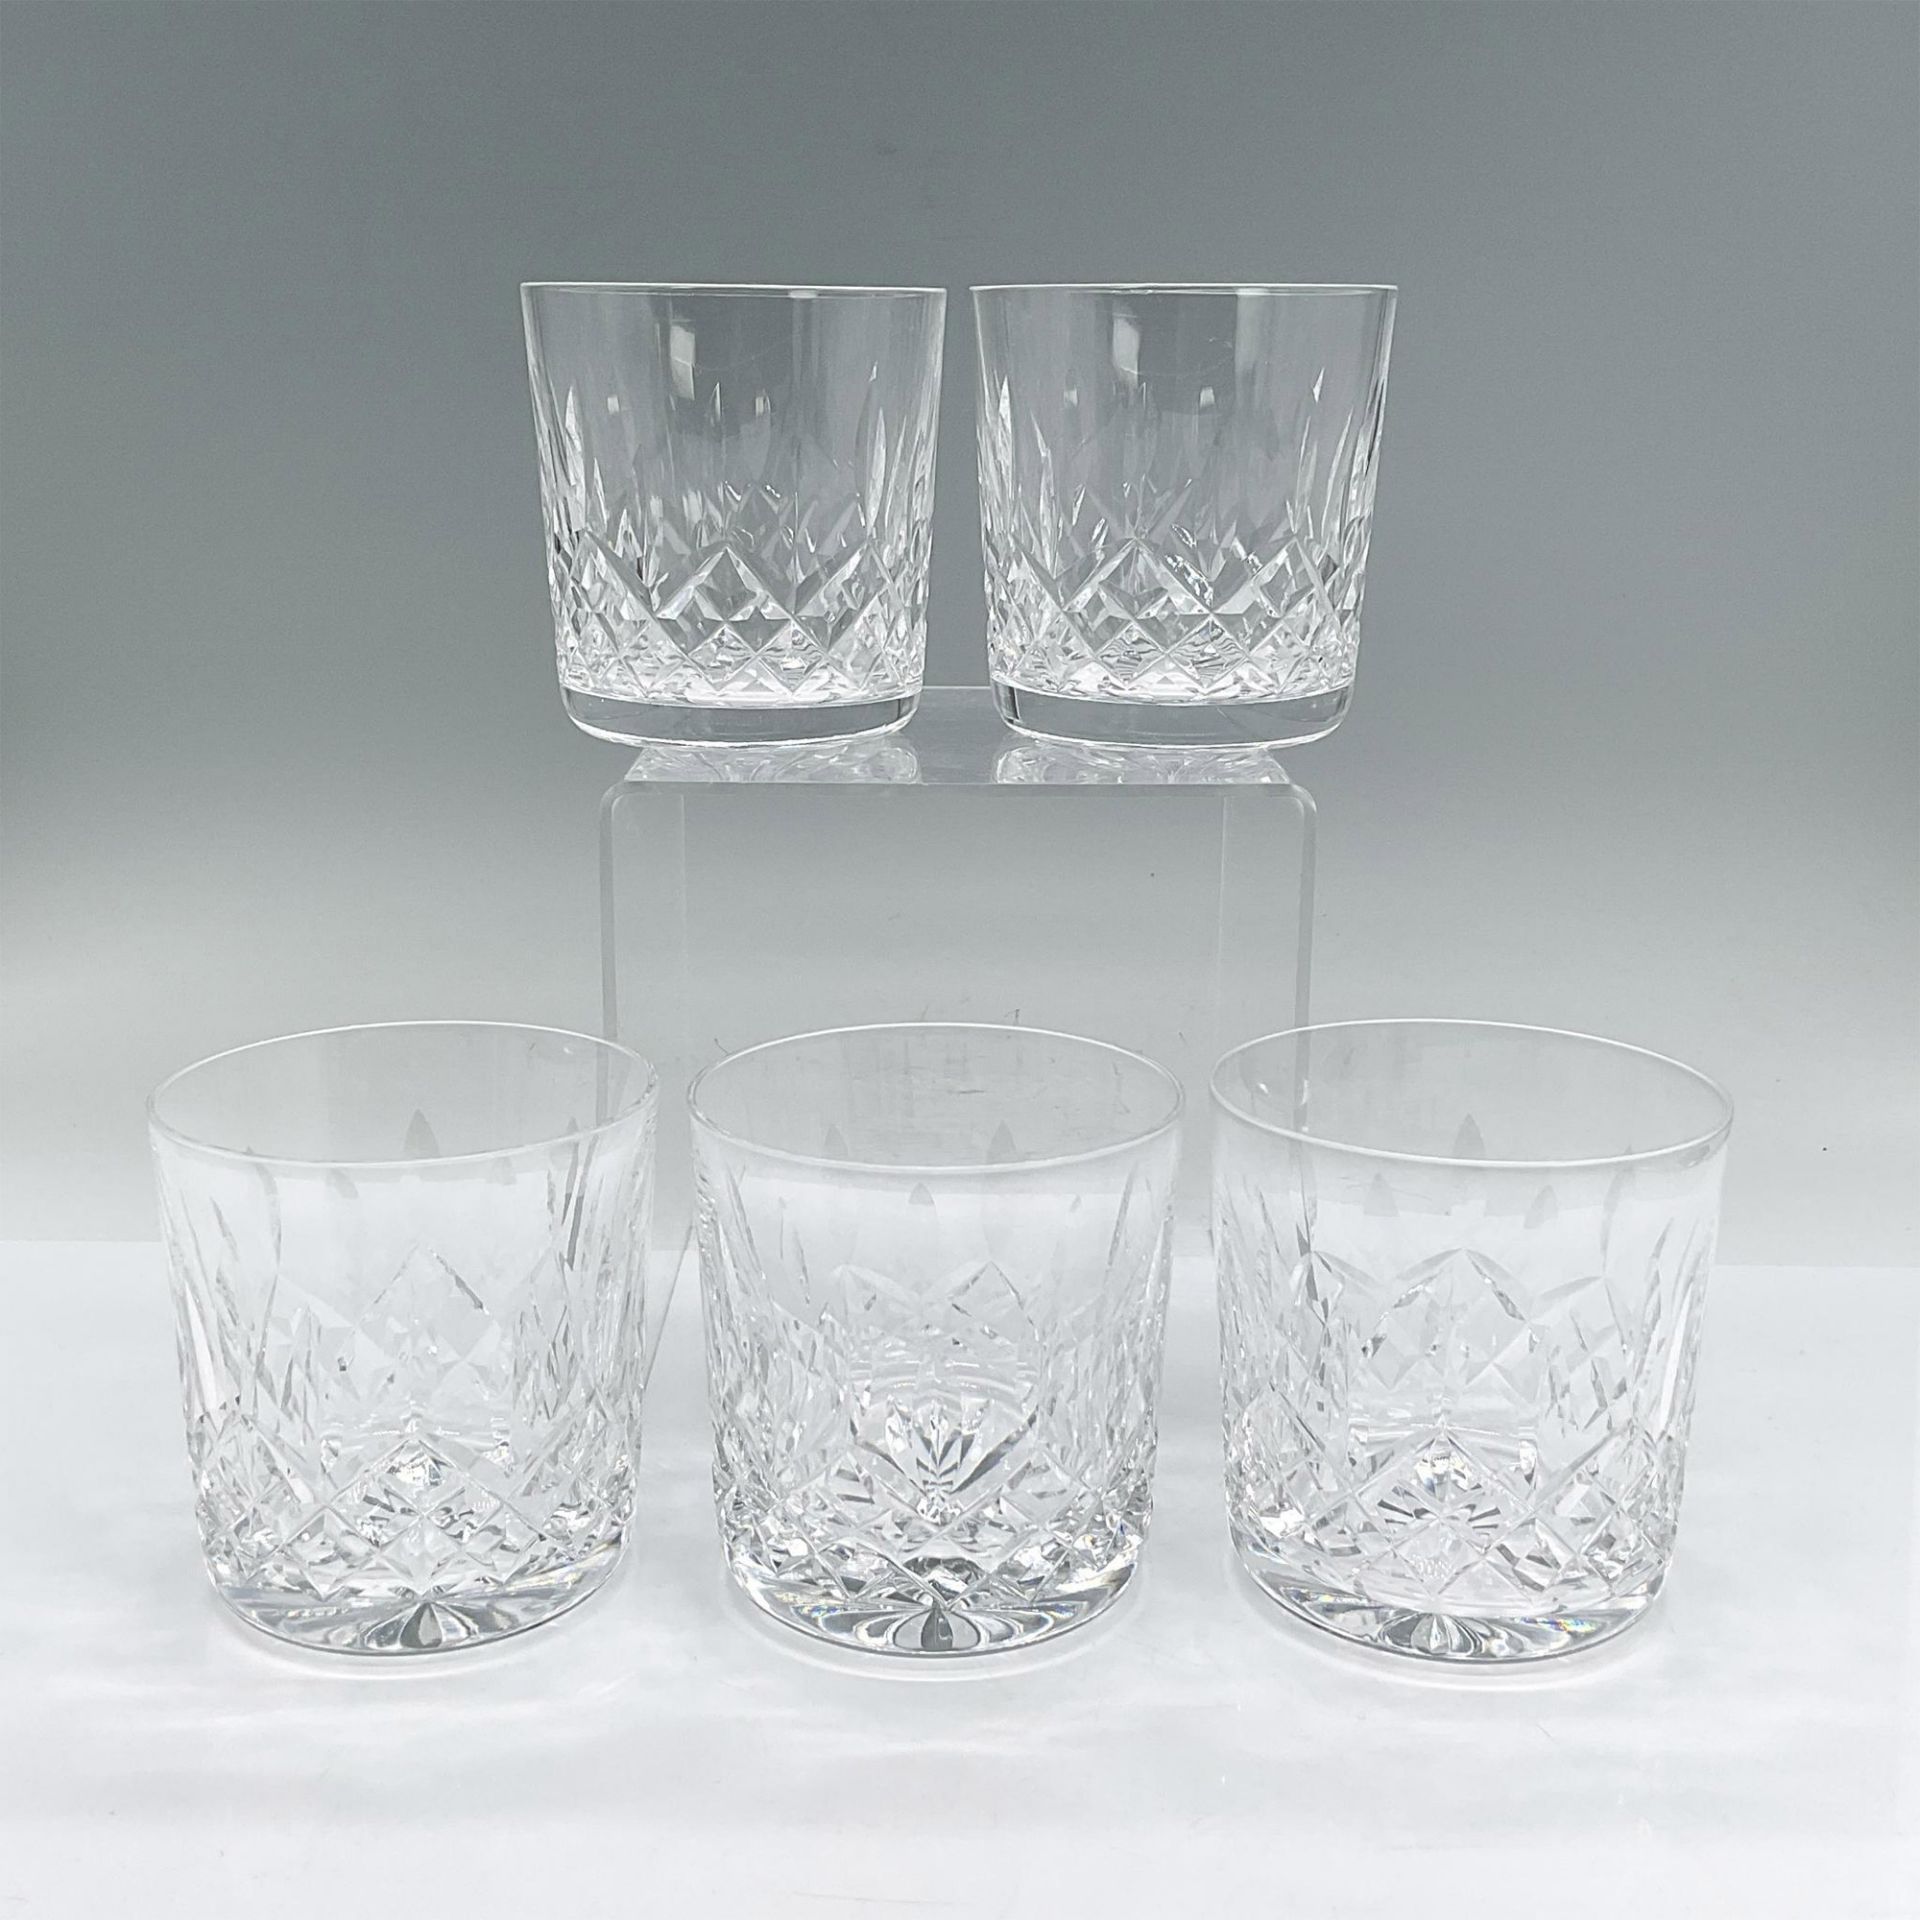 5pc Waterford Crystal Old Fashioned Glasses, Lismore